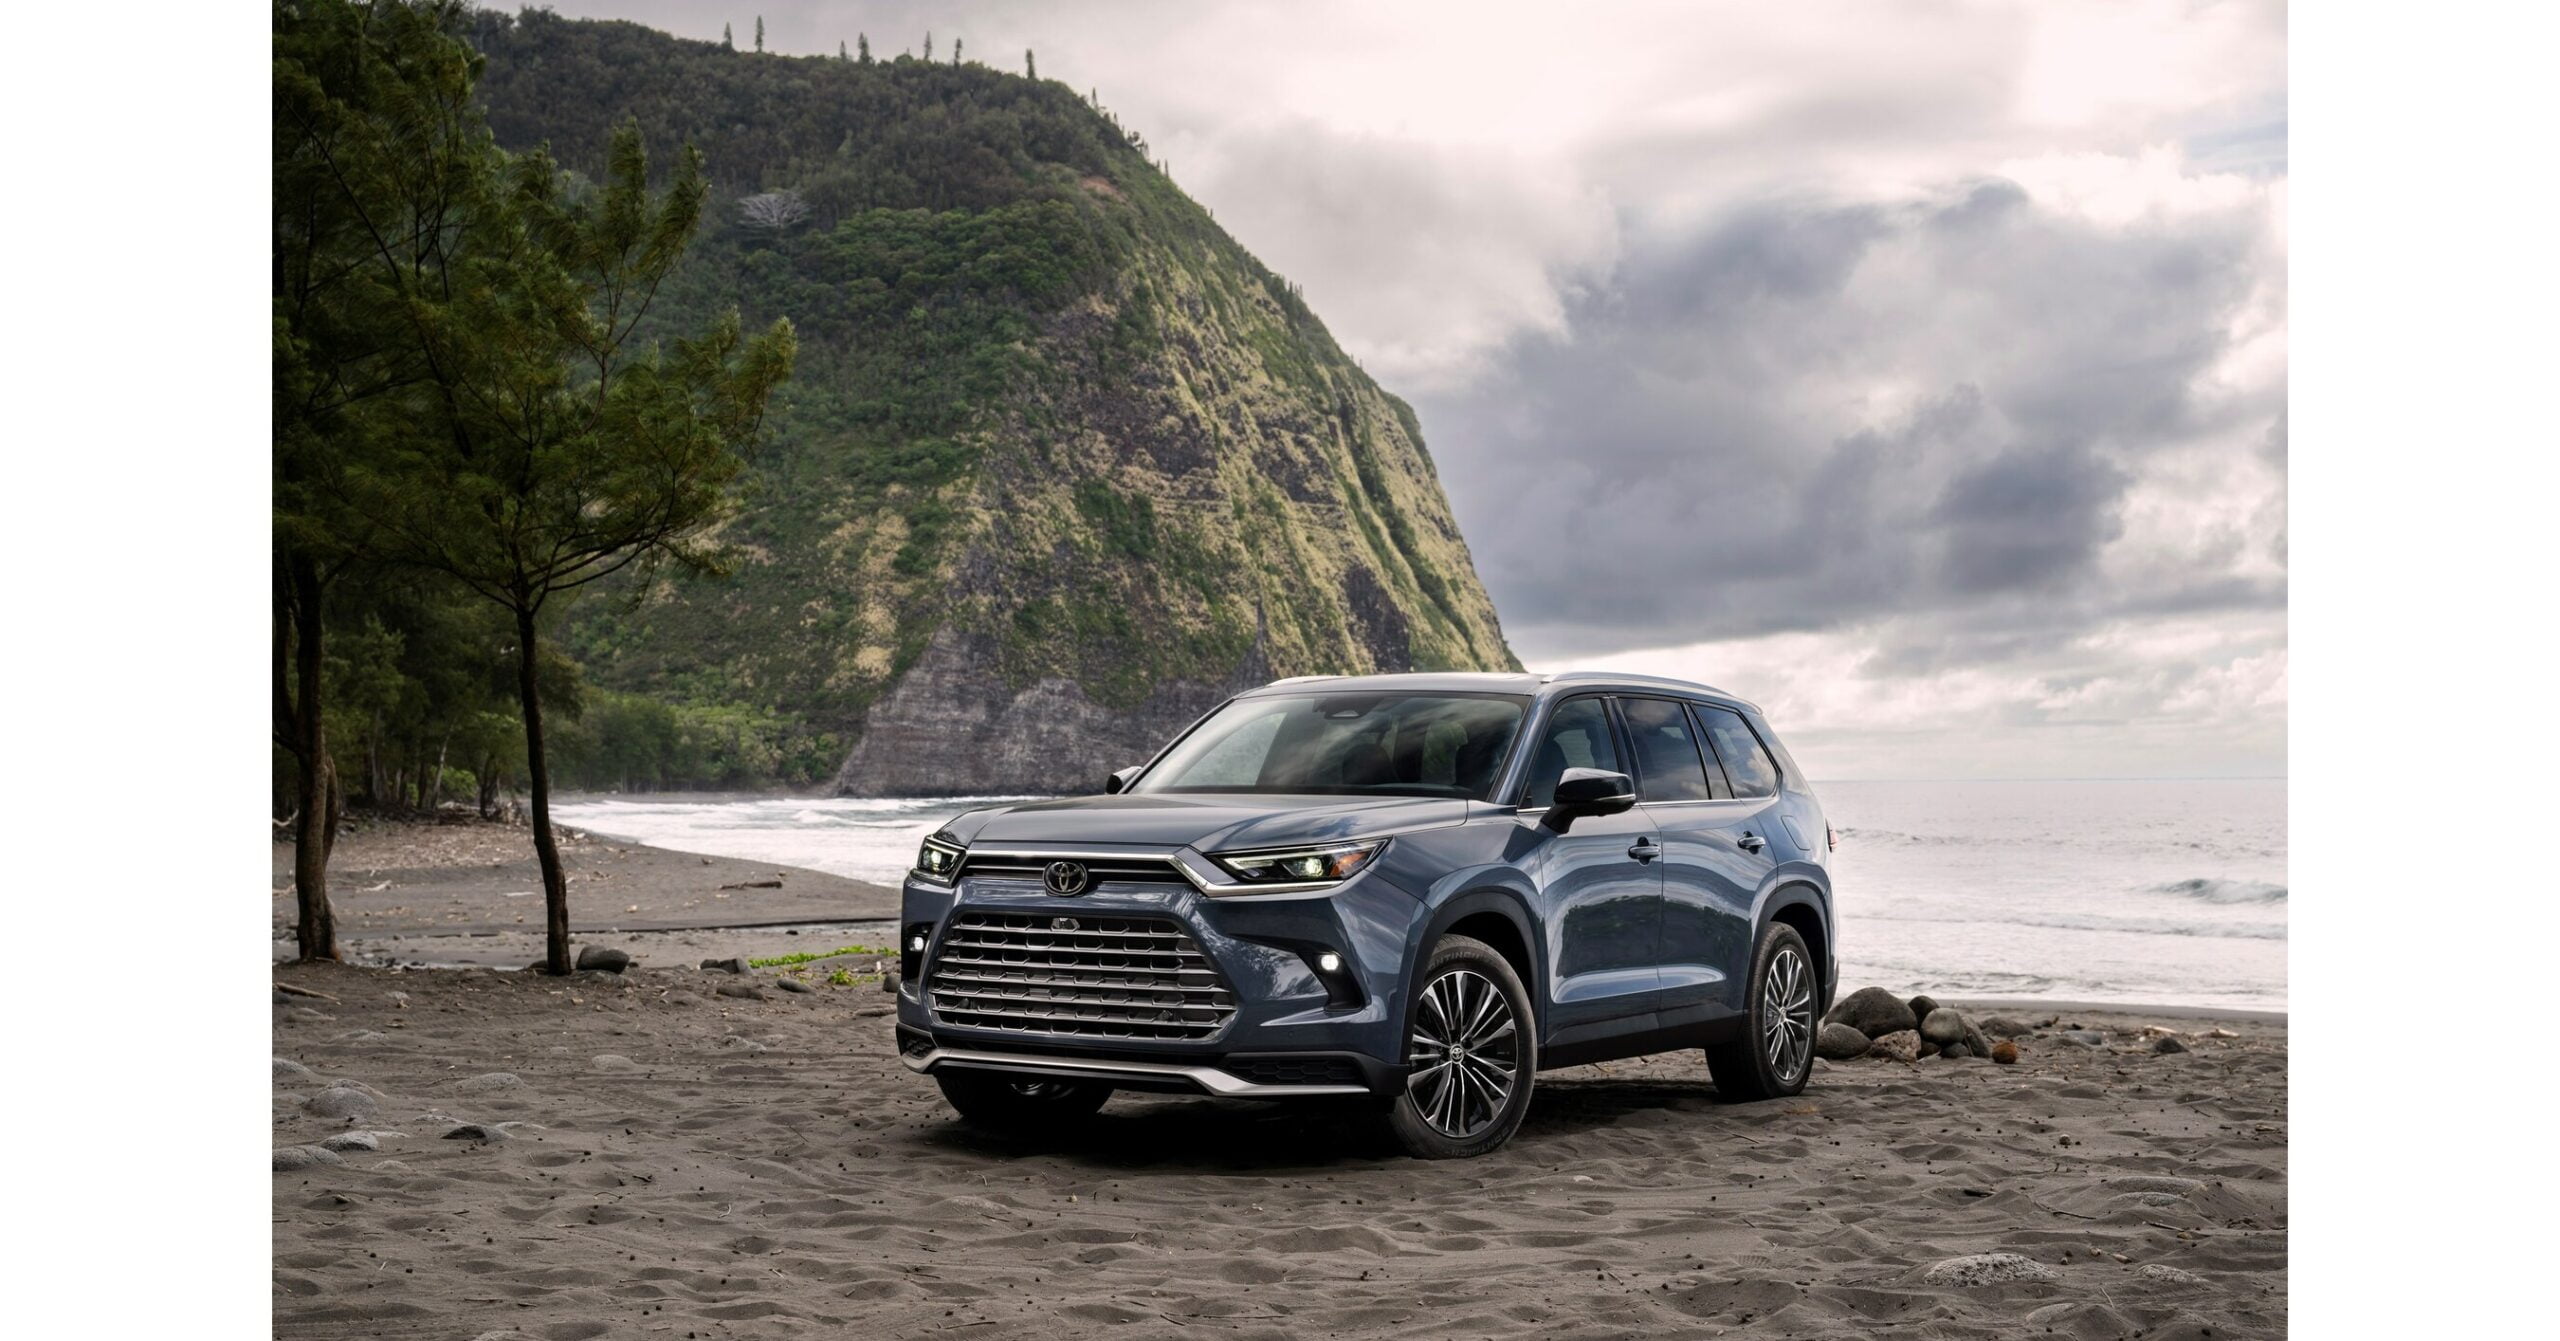 The Future of SUVs: A Sneak Peek into the High-Tech Features of the 2023 Toyota Highlander Hybrid - Smooth and responsive driving experience